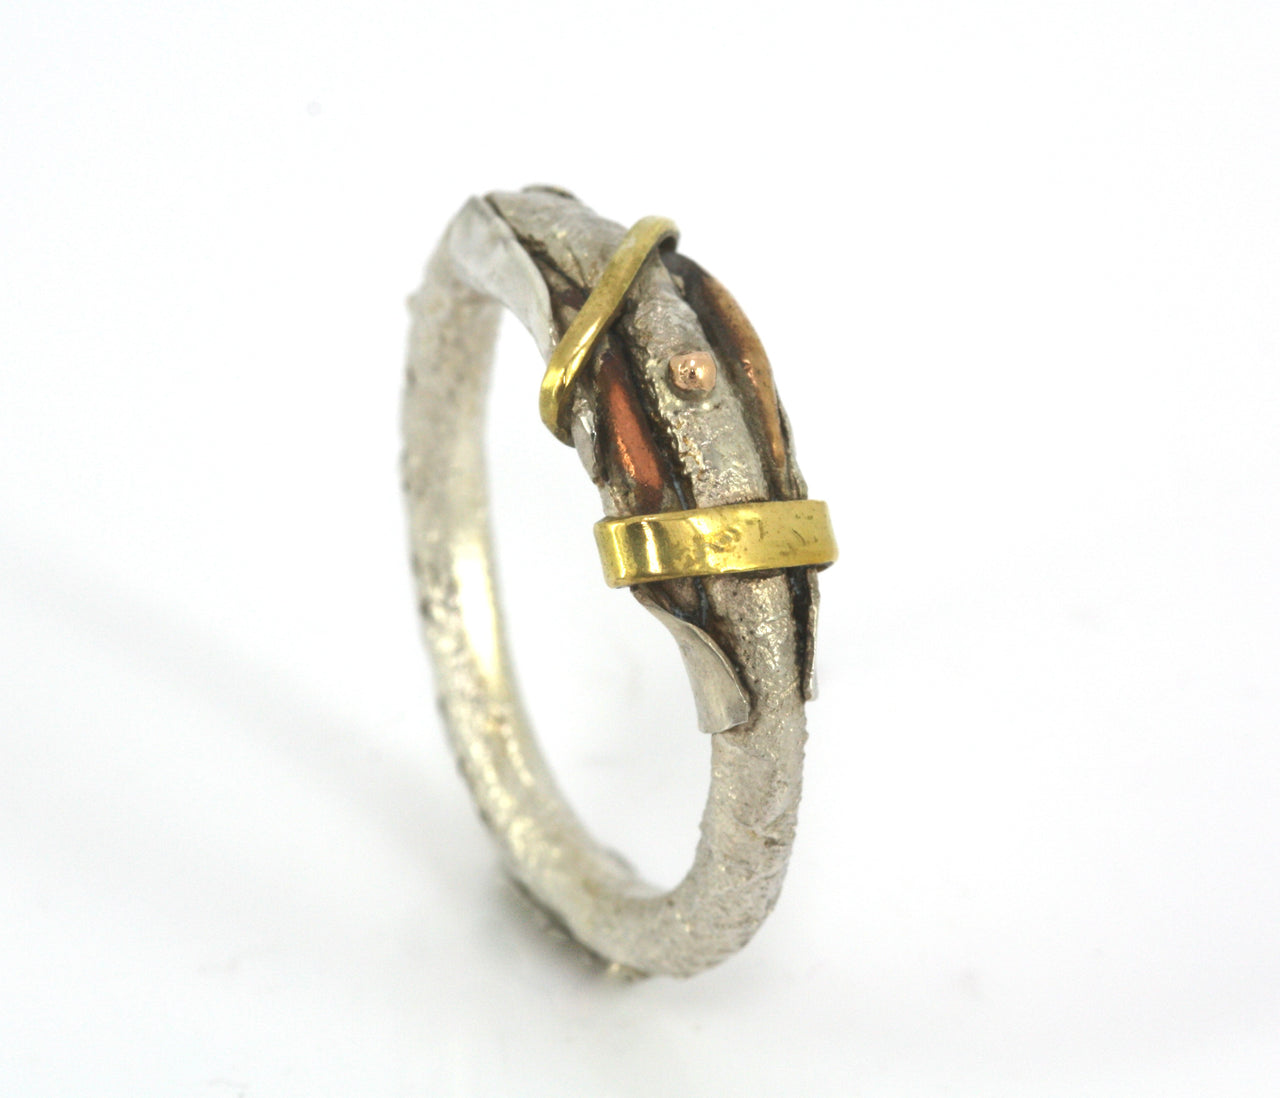 Silver, Copper and Gold Ring